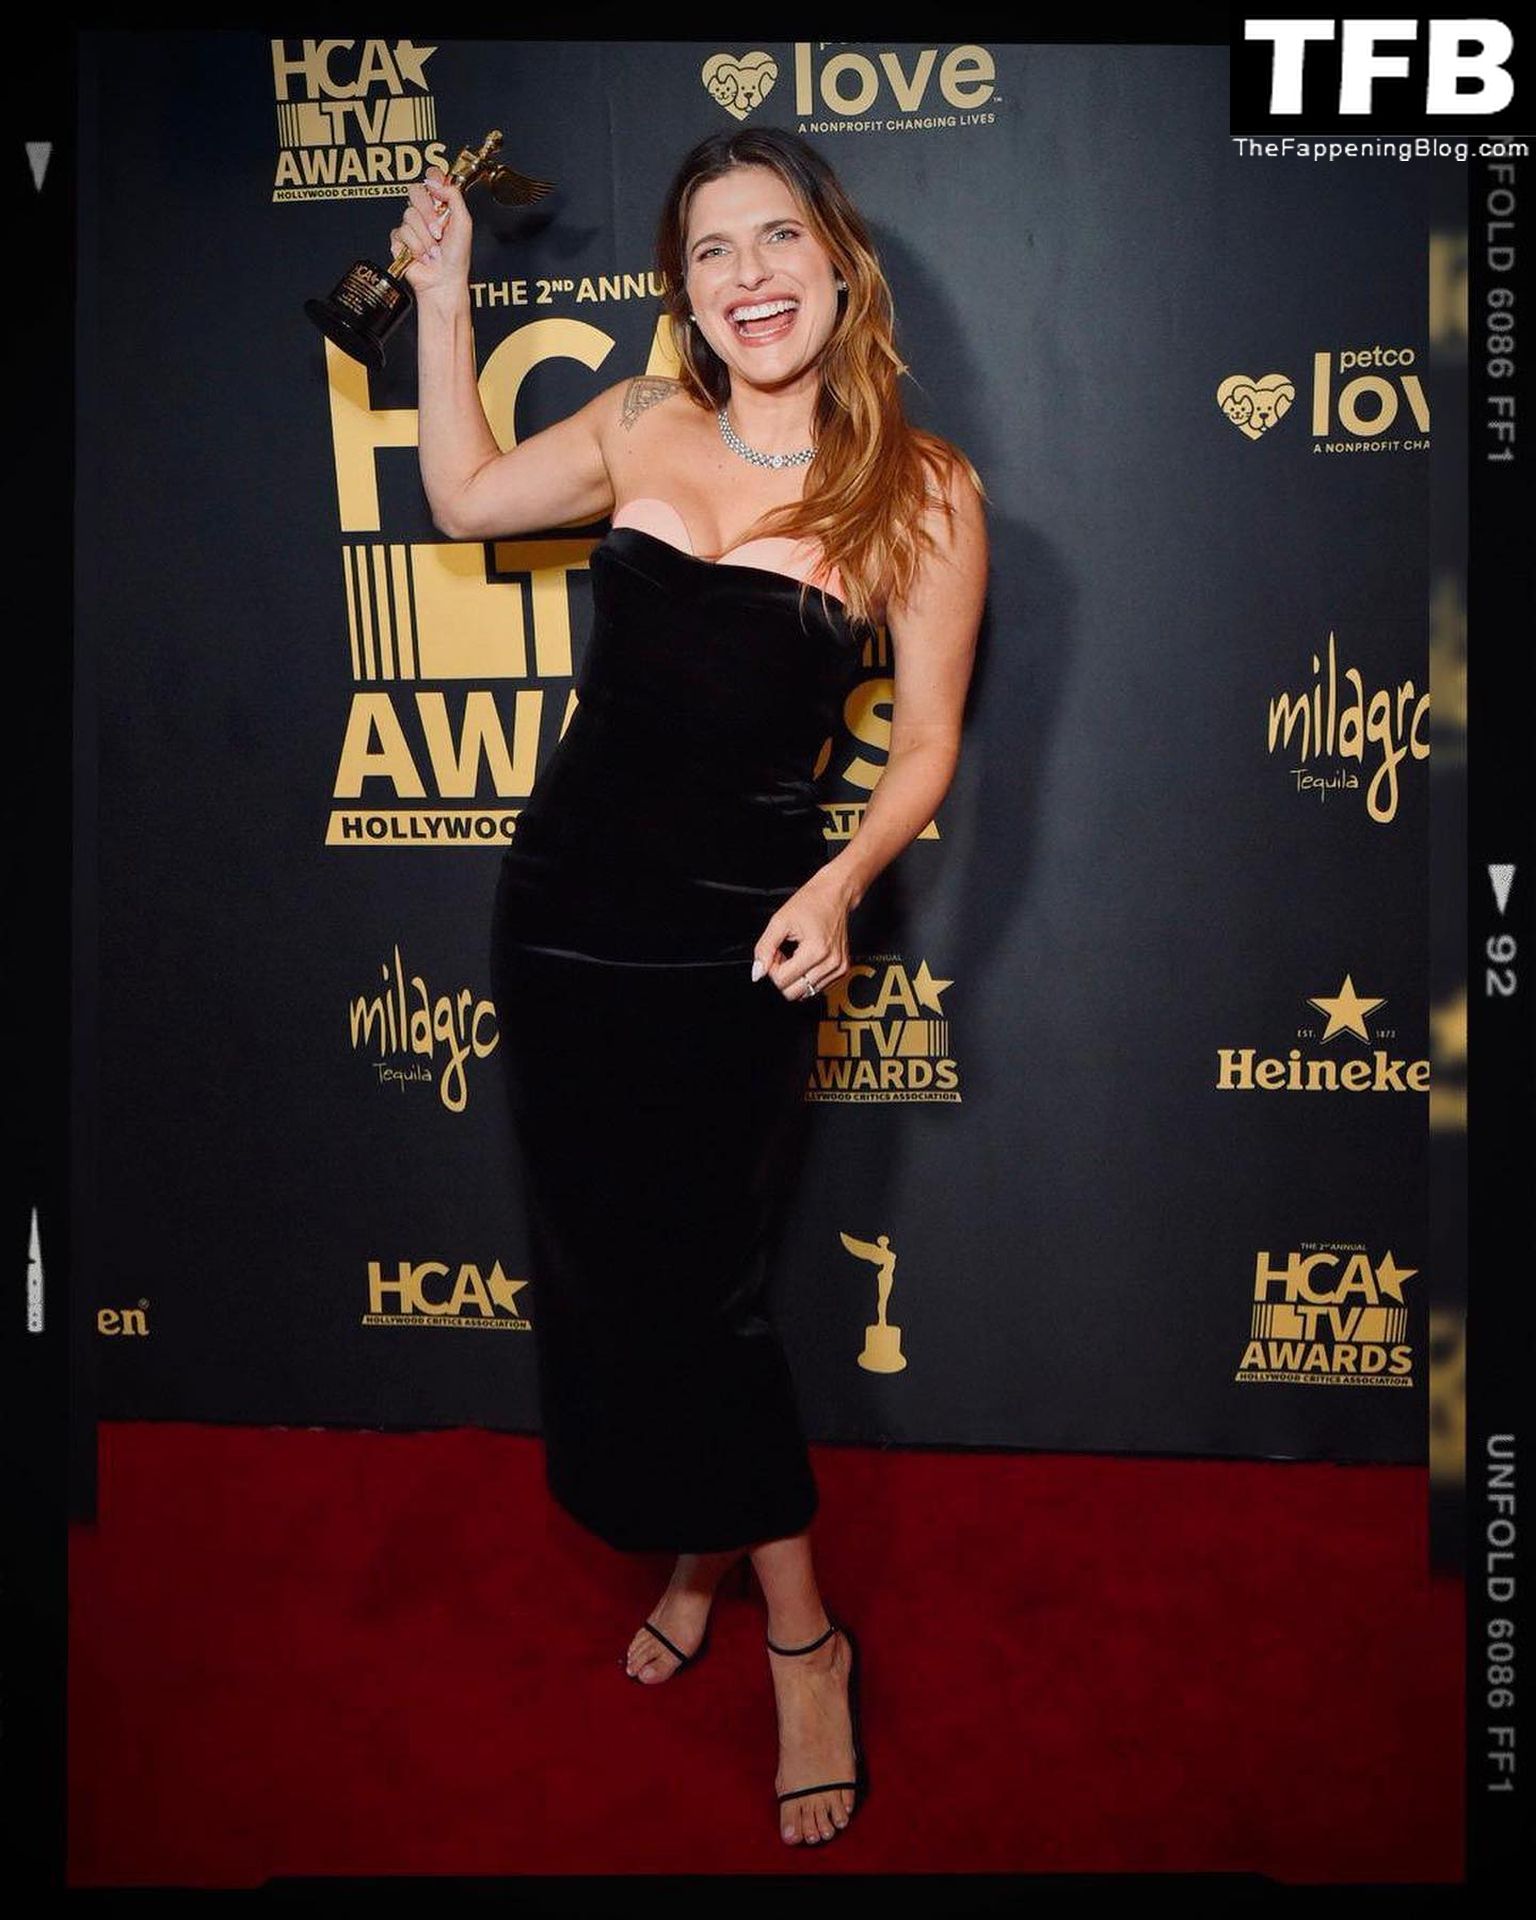 Lake Bell Poses at the 2nd Annual HCA TV Awards in Beverly Hills (10 Photos)